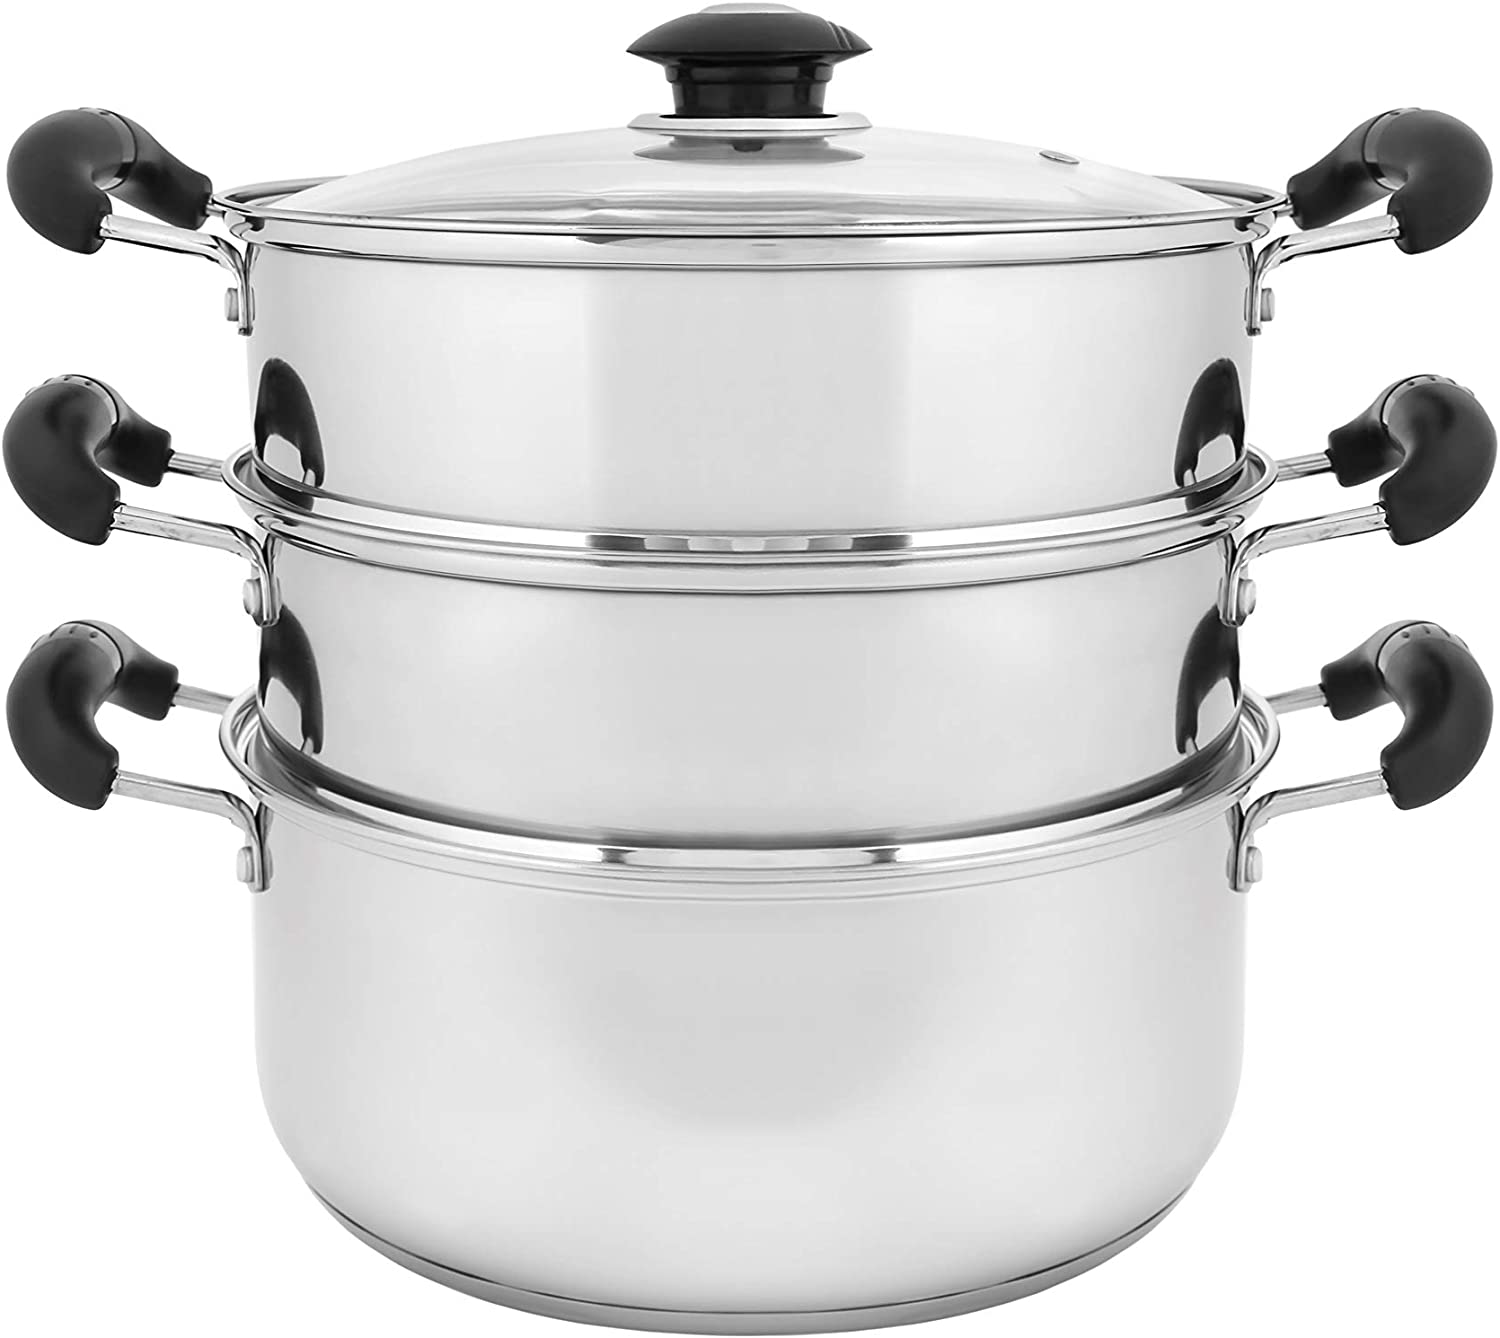 Stainless Steel Steamer Pot for Cooking, 2 Tier Steamer with Lid 10-Inch  Steamer Cookware, Thicken Food Steaming Pot for Vegetable, Tamale, Seafood